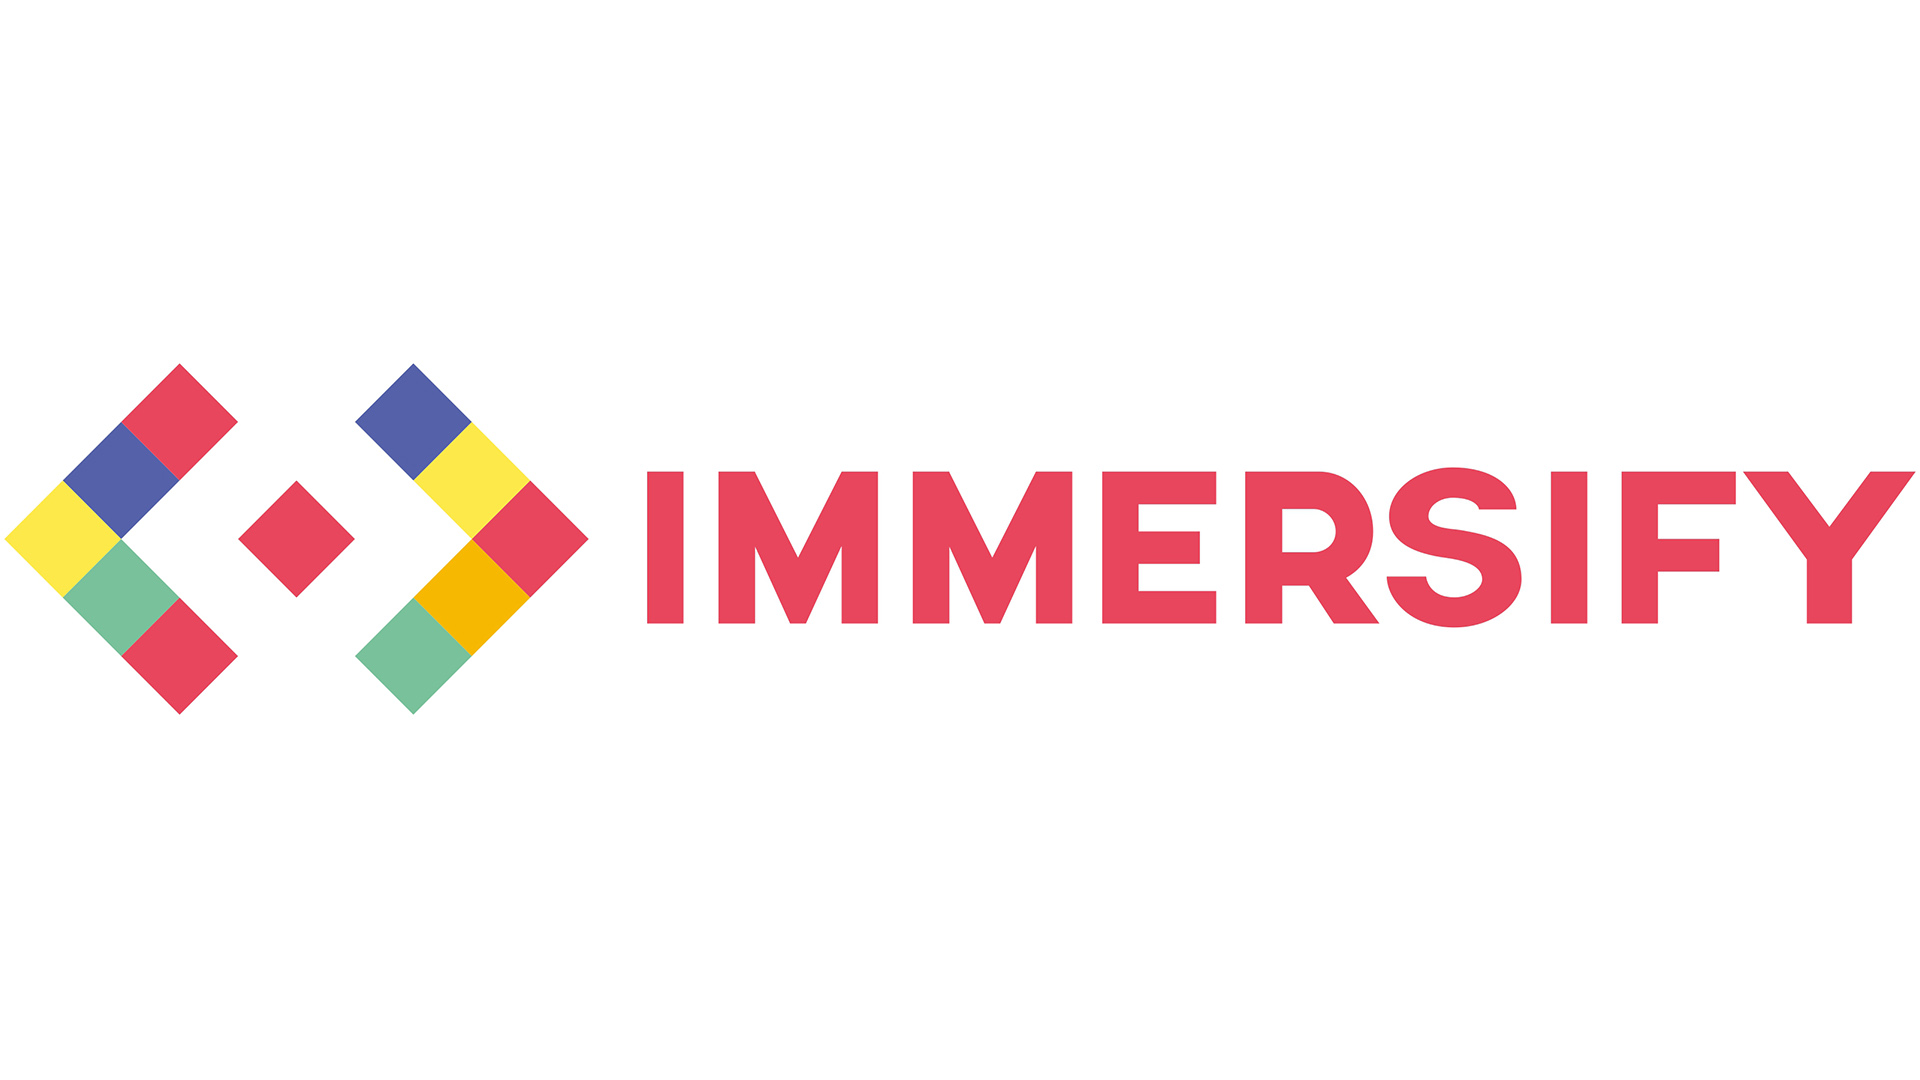 EU project Immersify is coming to an end, research and development continues